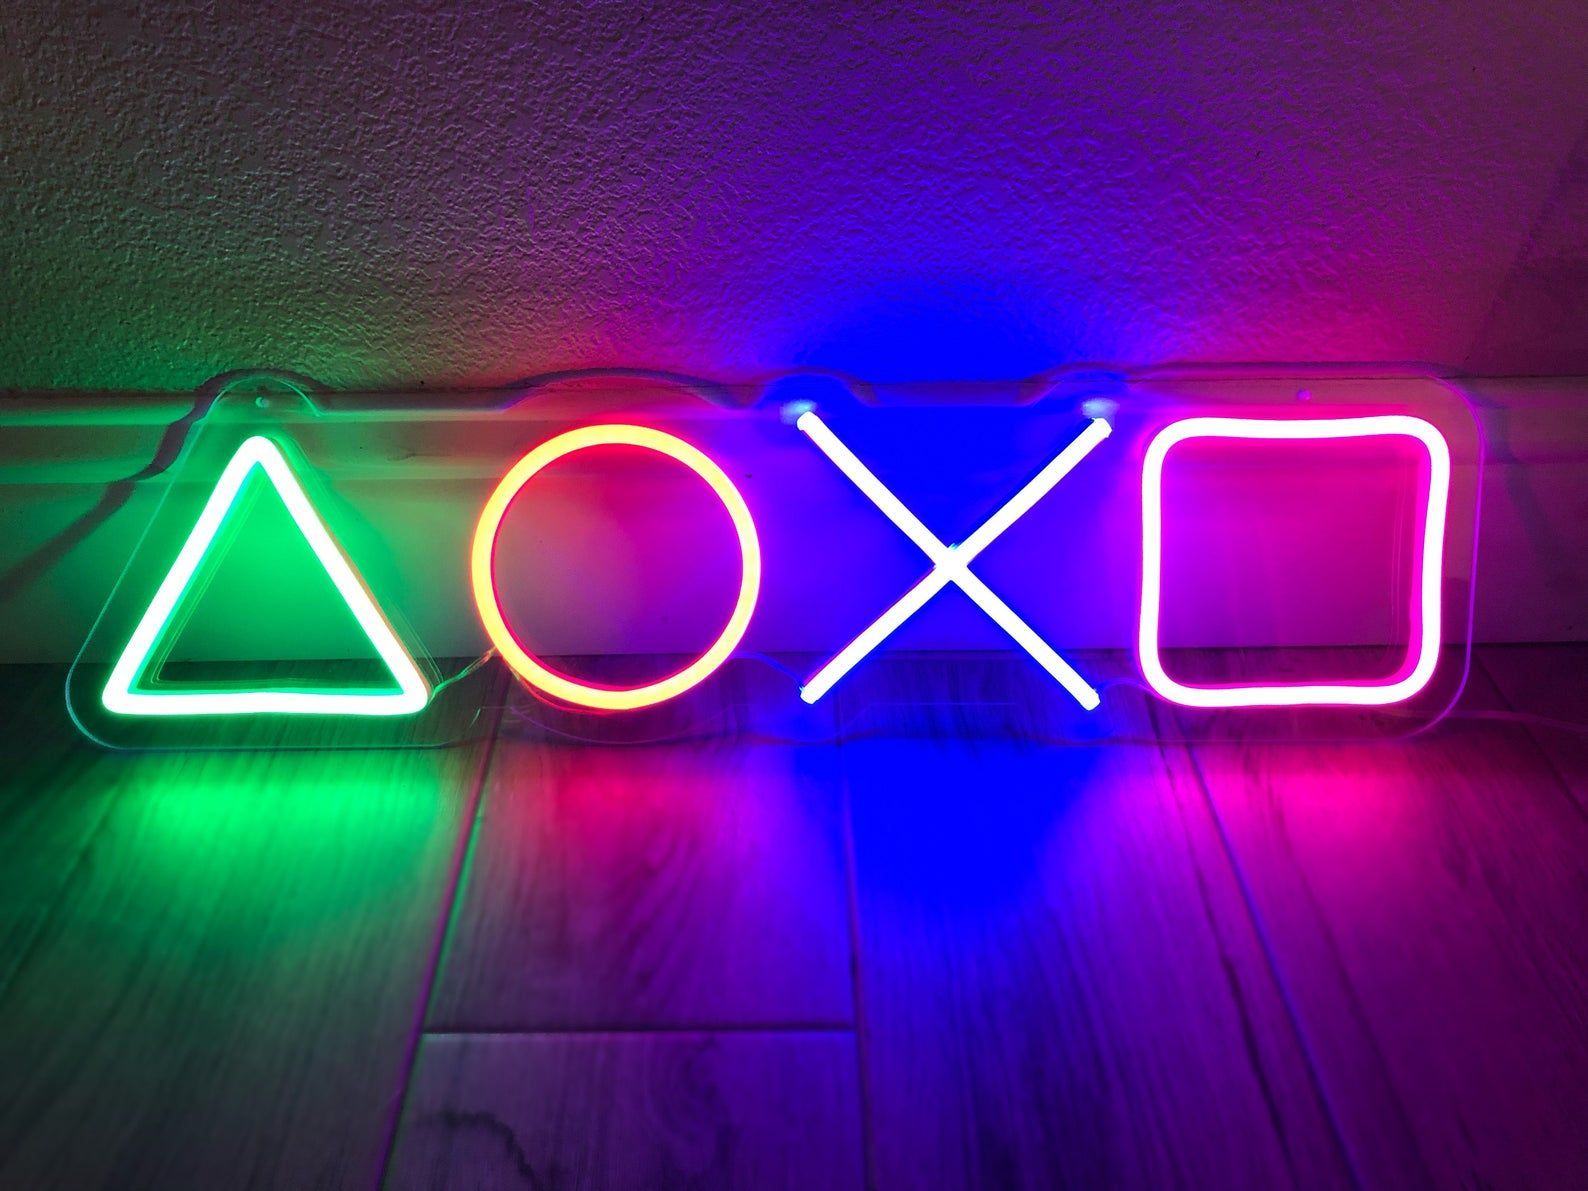 PlayStation LED Neon Sign. Etsy. Led neon signs, Neon signs, Neon room